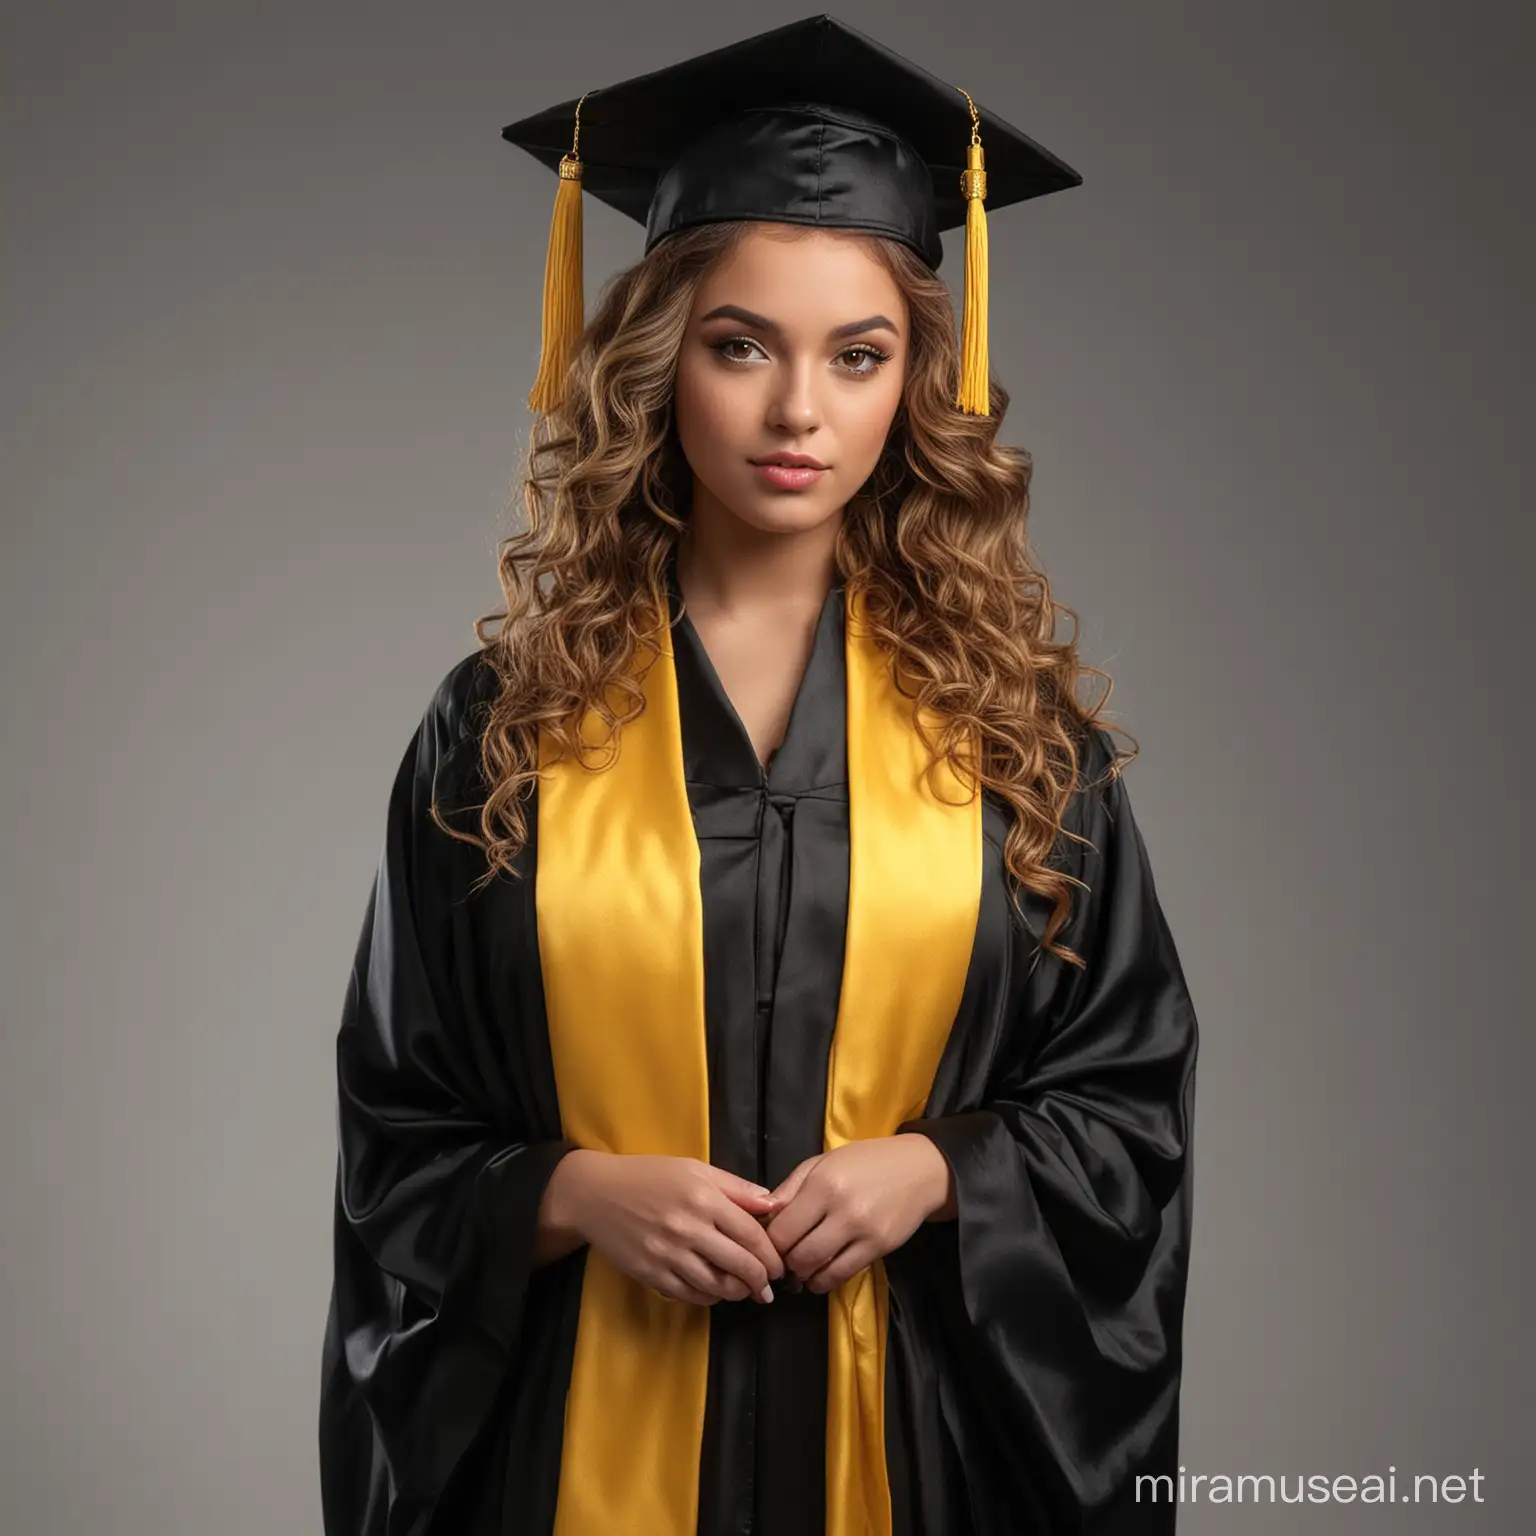 full body darksinmodel high school student wearing a black cap and gown wearing a yello stole professional photoshoot,glam makeup,curly hair,4k, studio lighting,textured hazel eye,ultra-detailed photorealism